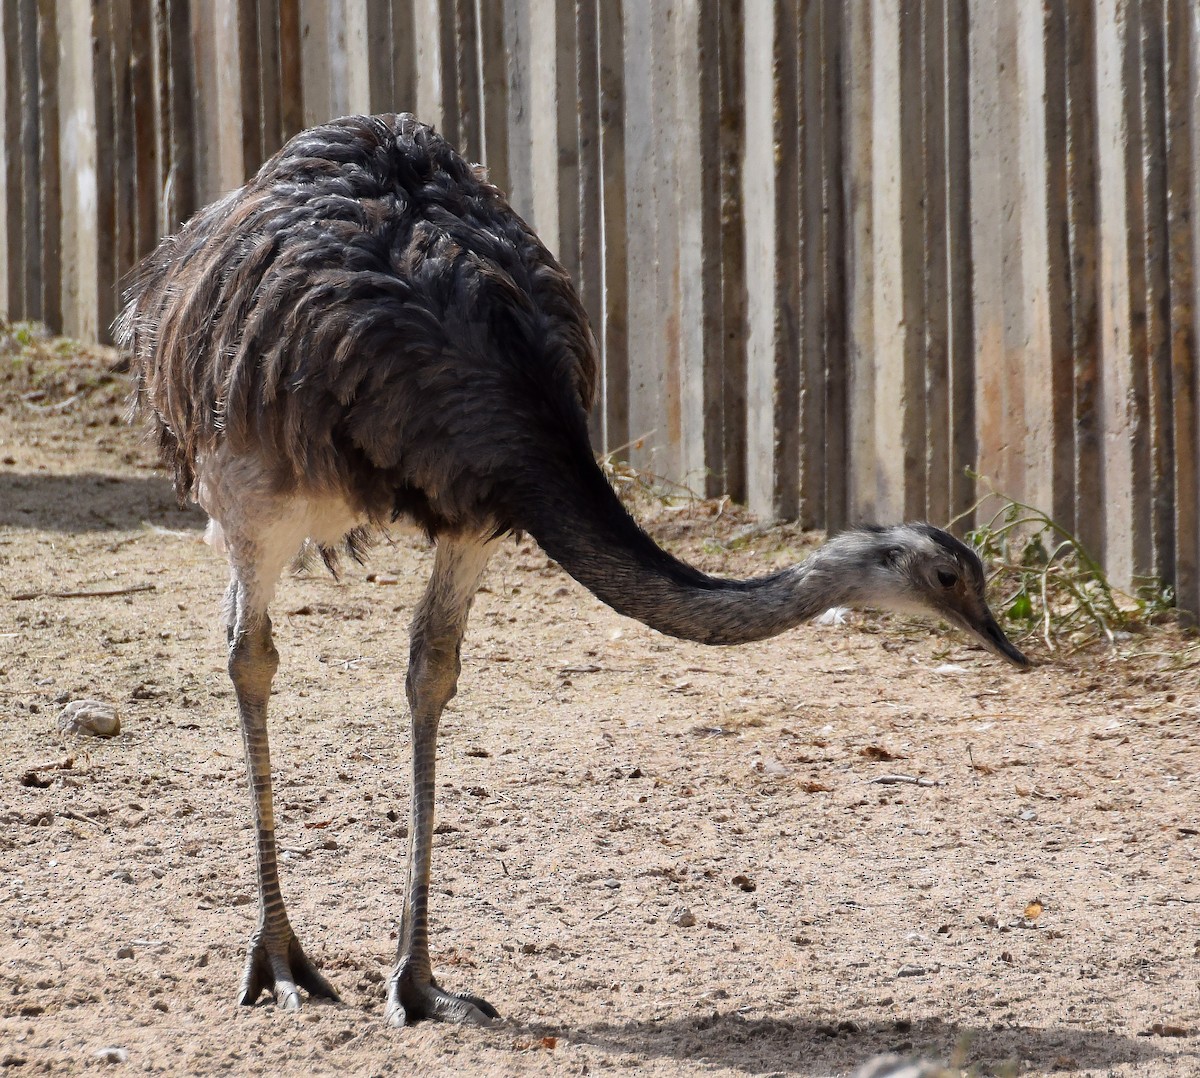 Greater Rhea - A Emmerson